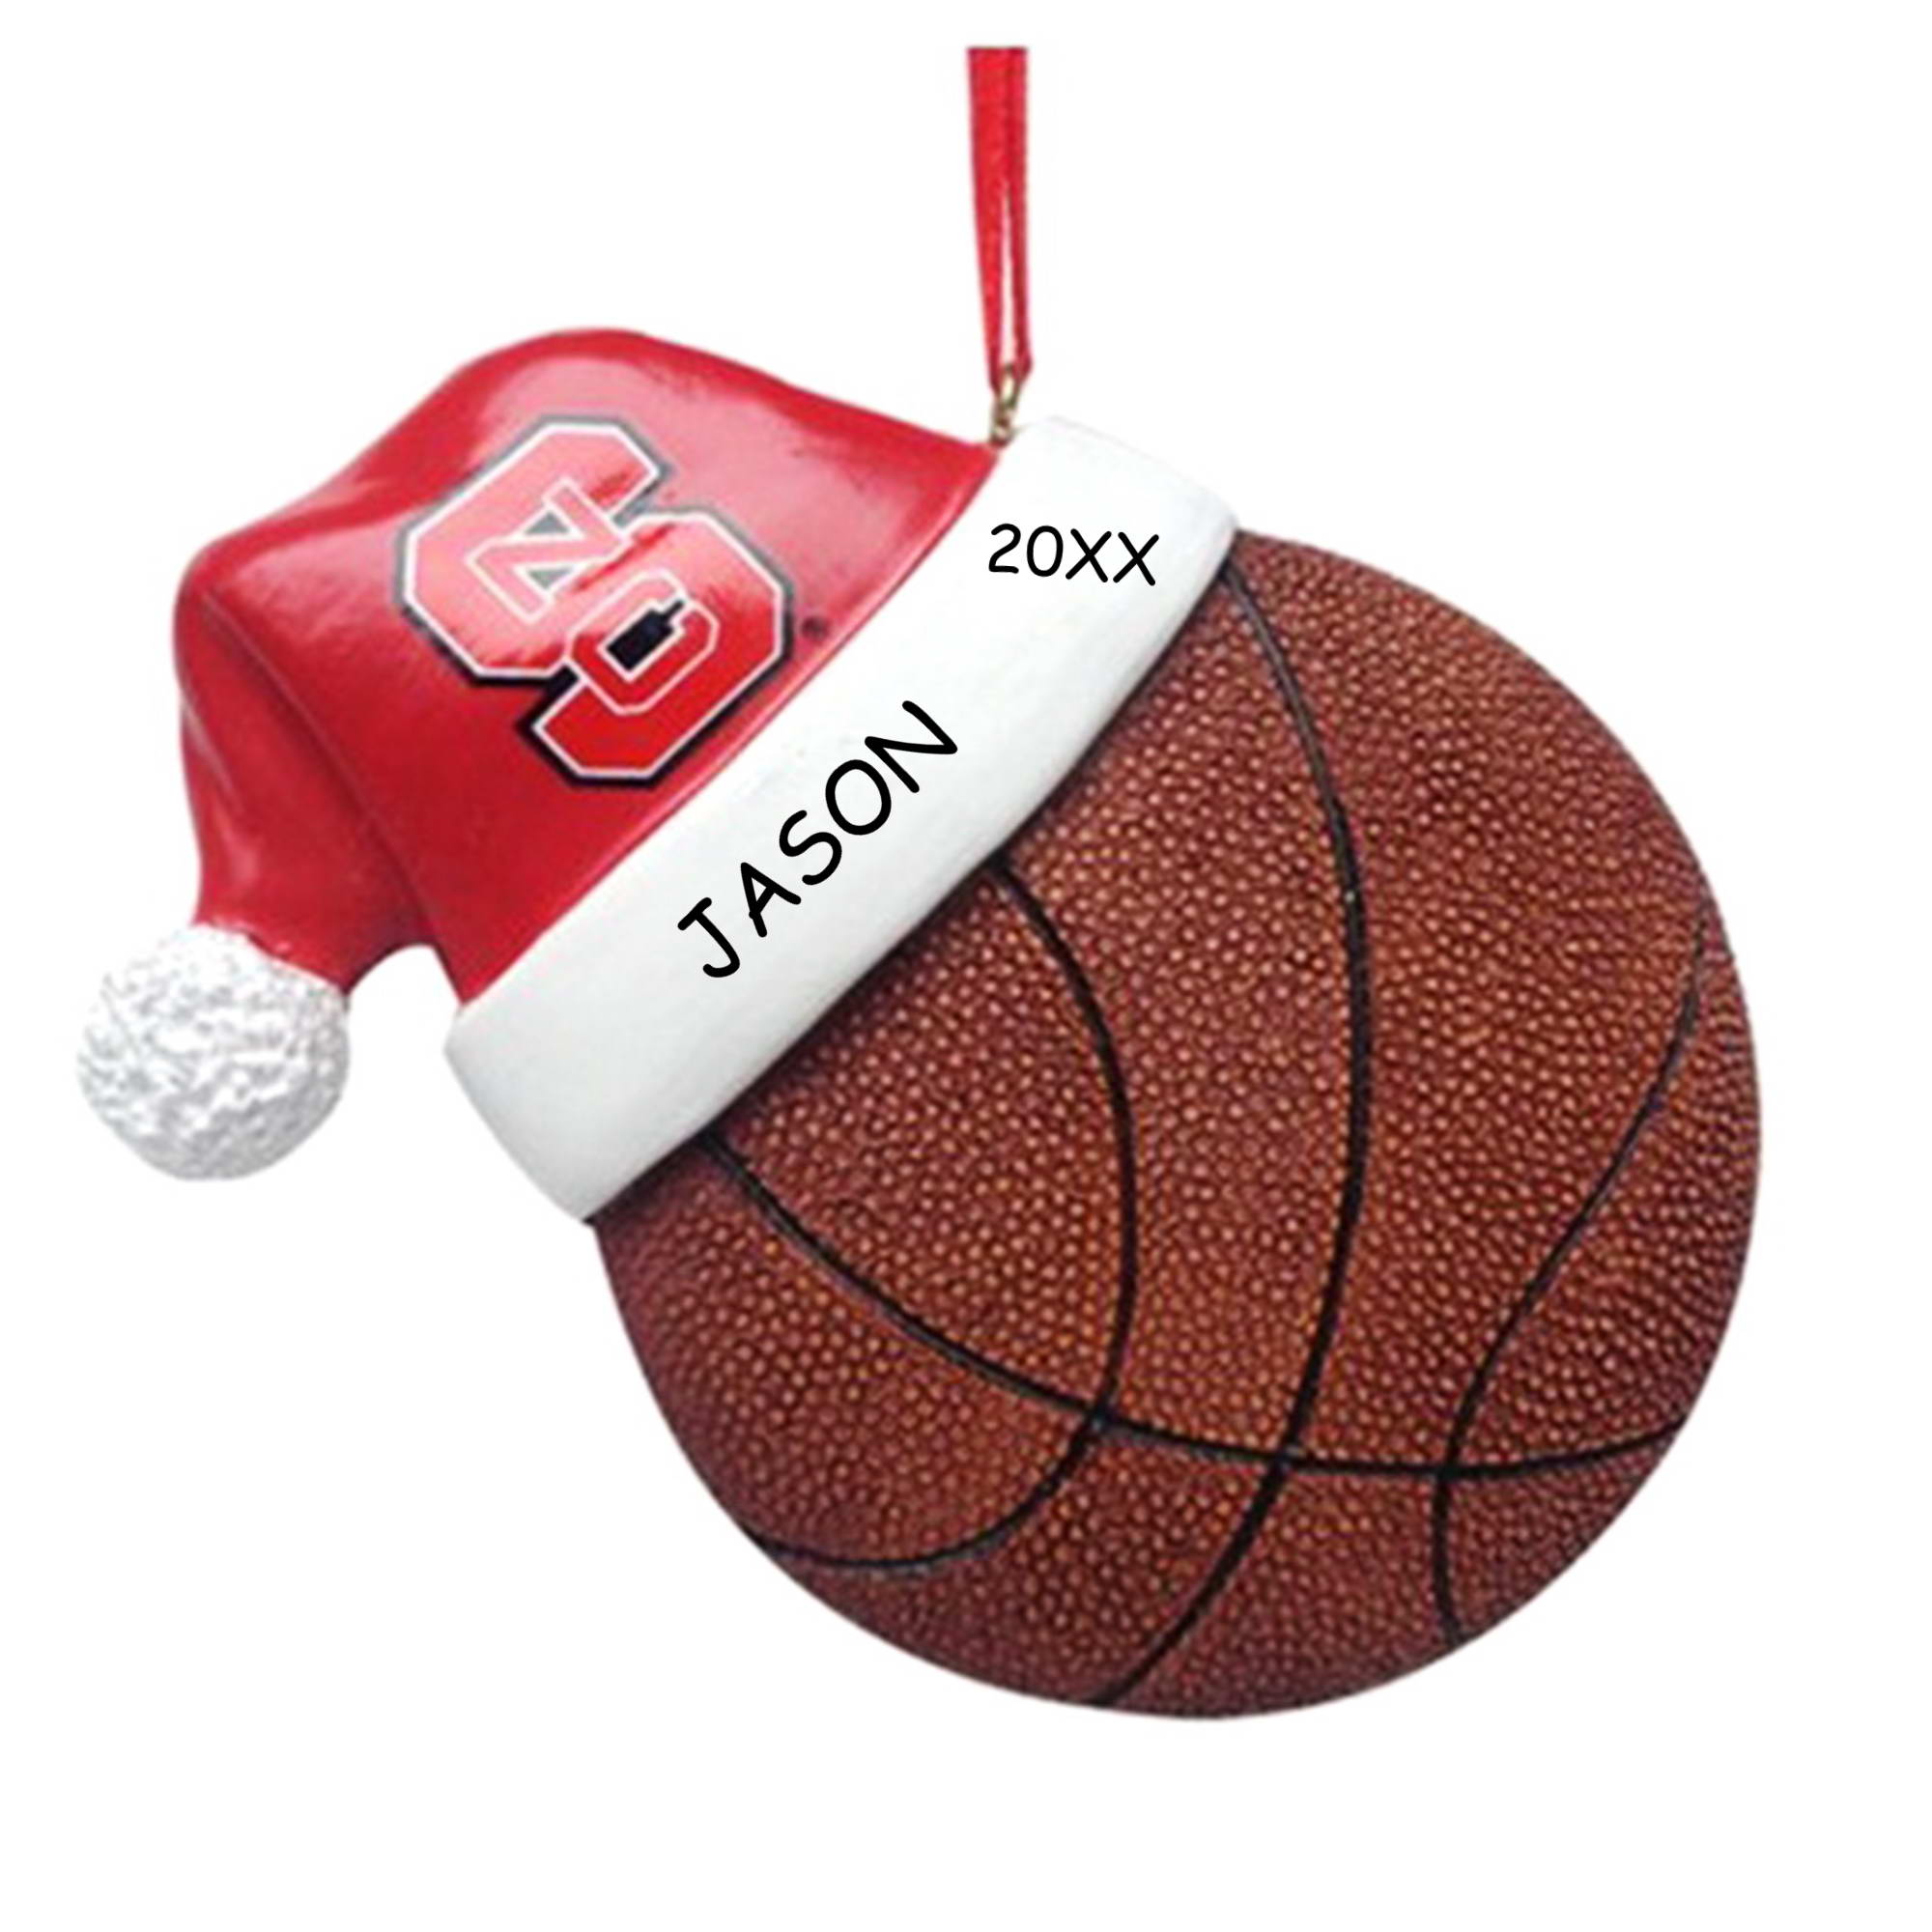 Personalized Licensed Collegiate Basketball Sports Christmas Ornament - NC State